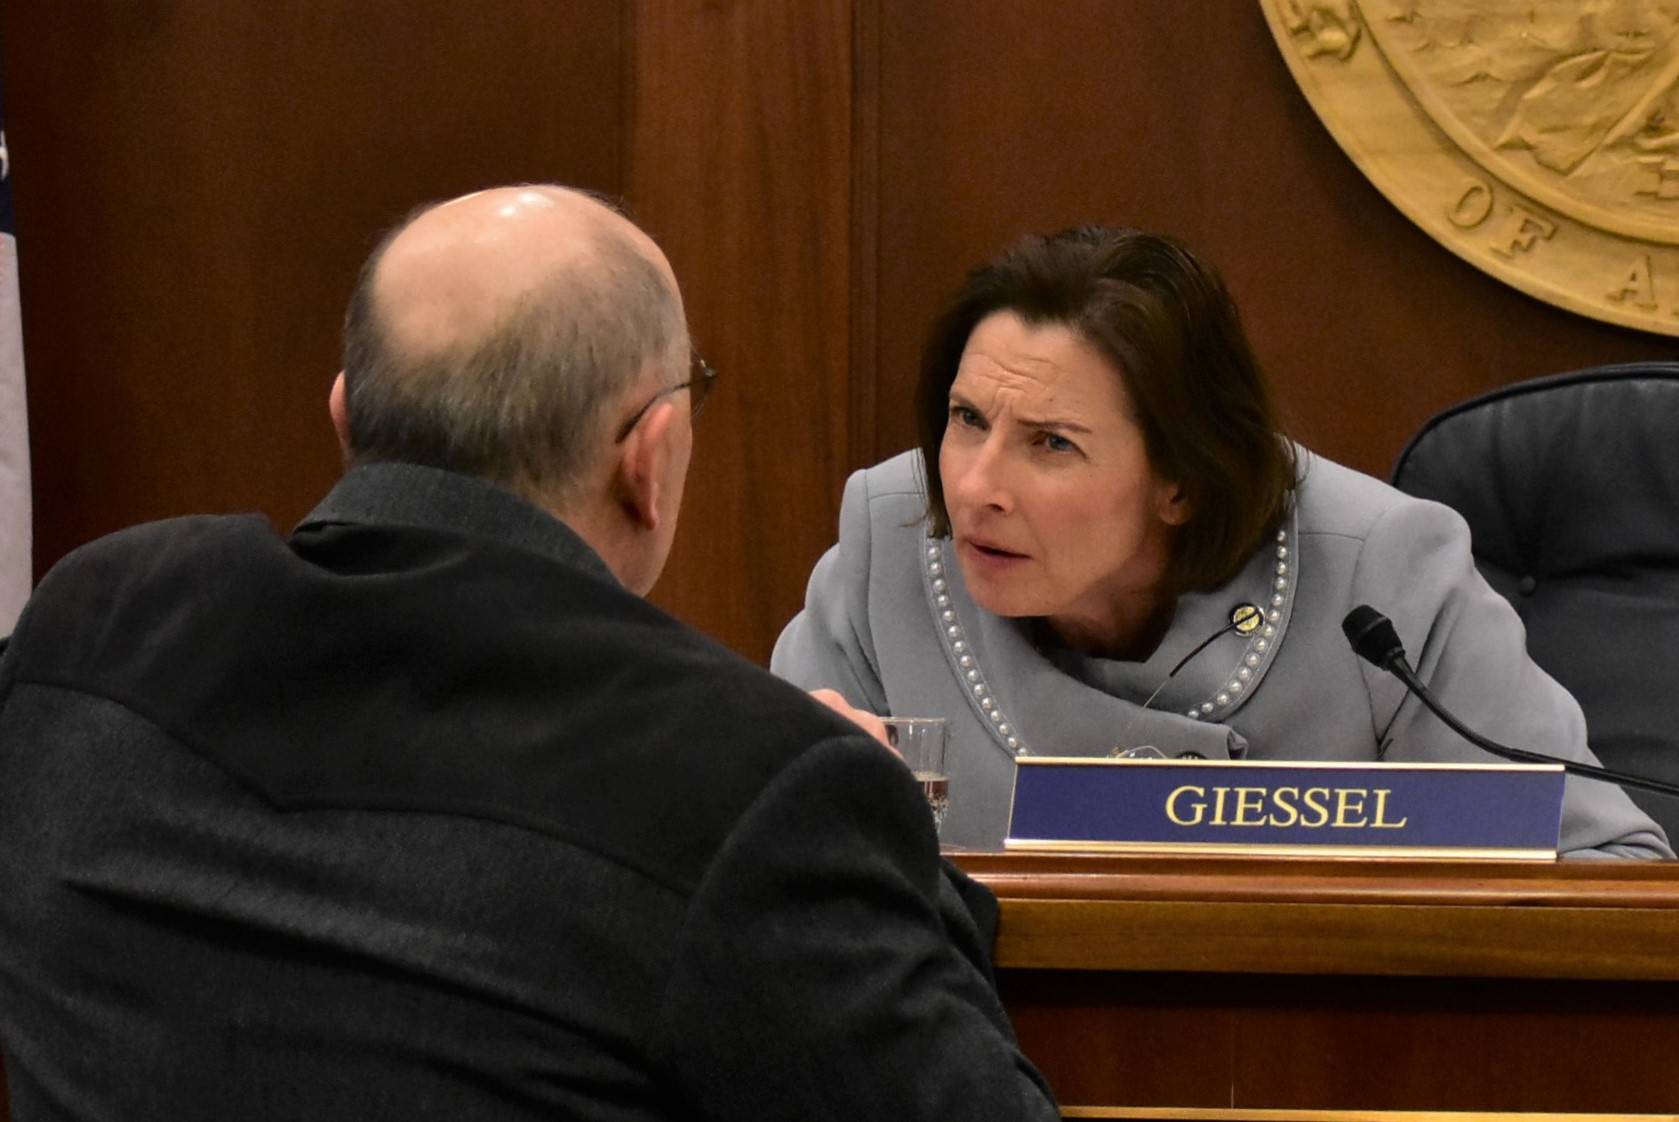 Senate President Cathy Giessel, R-Anchorage, speaks to Sen. Click Bishop, R-North Pole, on Monday, March 23, 2020. (Peter Segall | Juneau Empire)